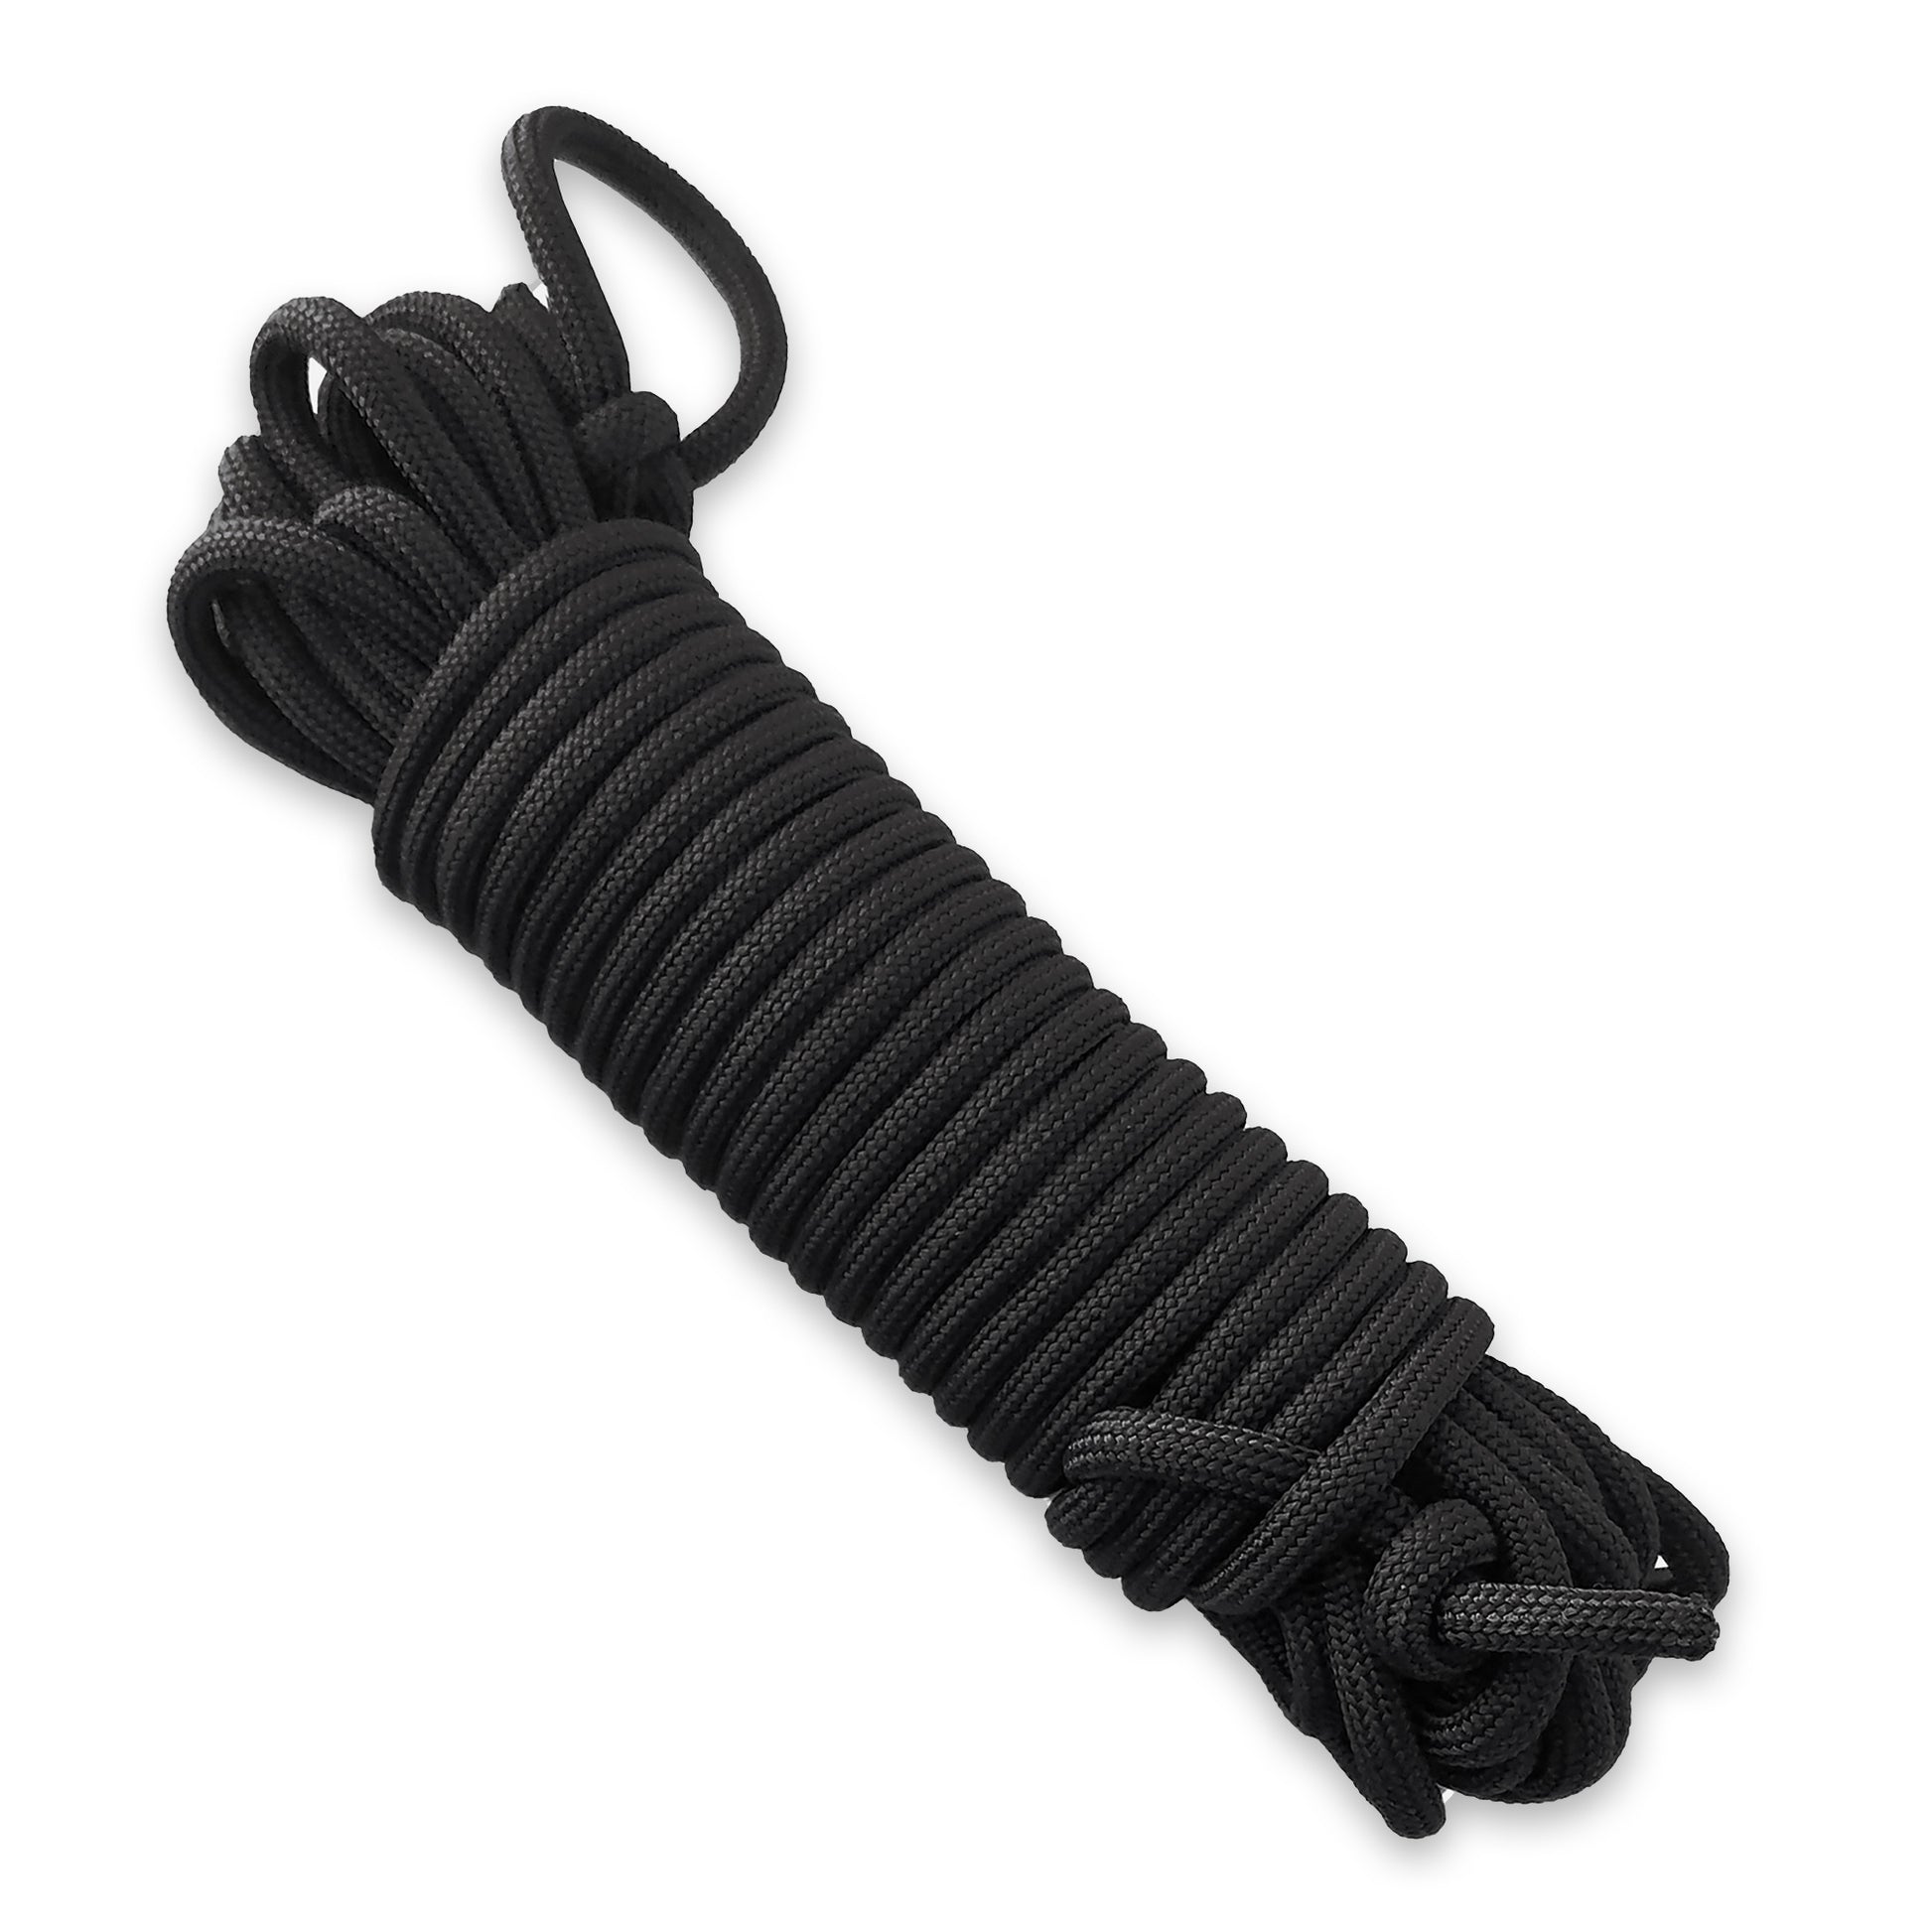 Paracord Bracelet Kit - 125 Feet of 550 Paracord with 10 Black Side Release Buckles - 5 Hanks of 25 Feet of 550 Paracord - Perfect for Crafting